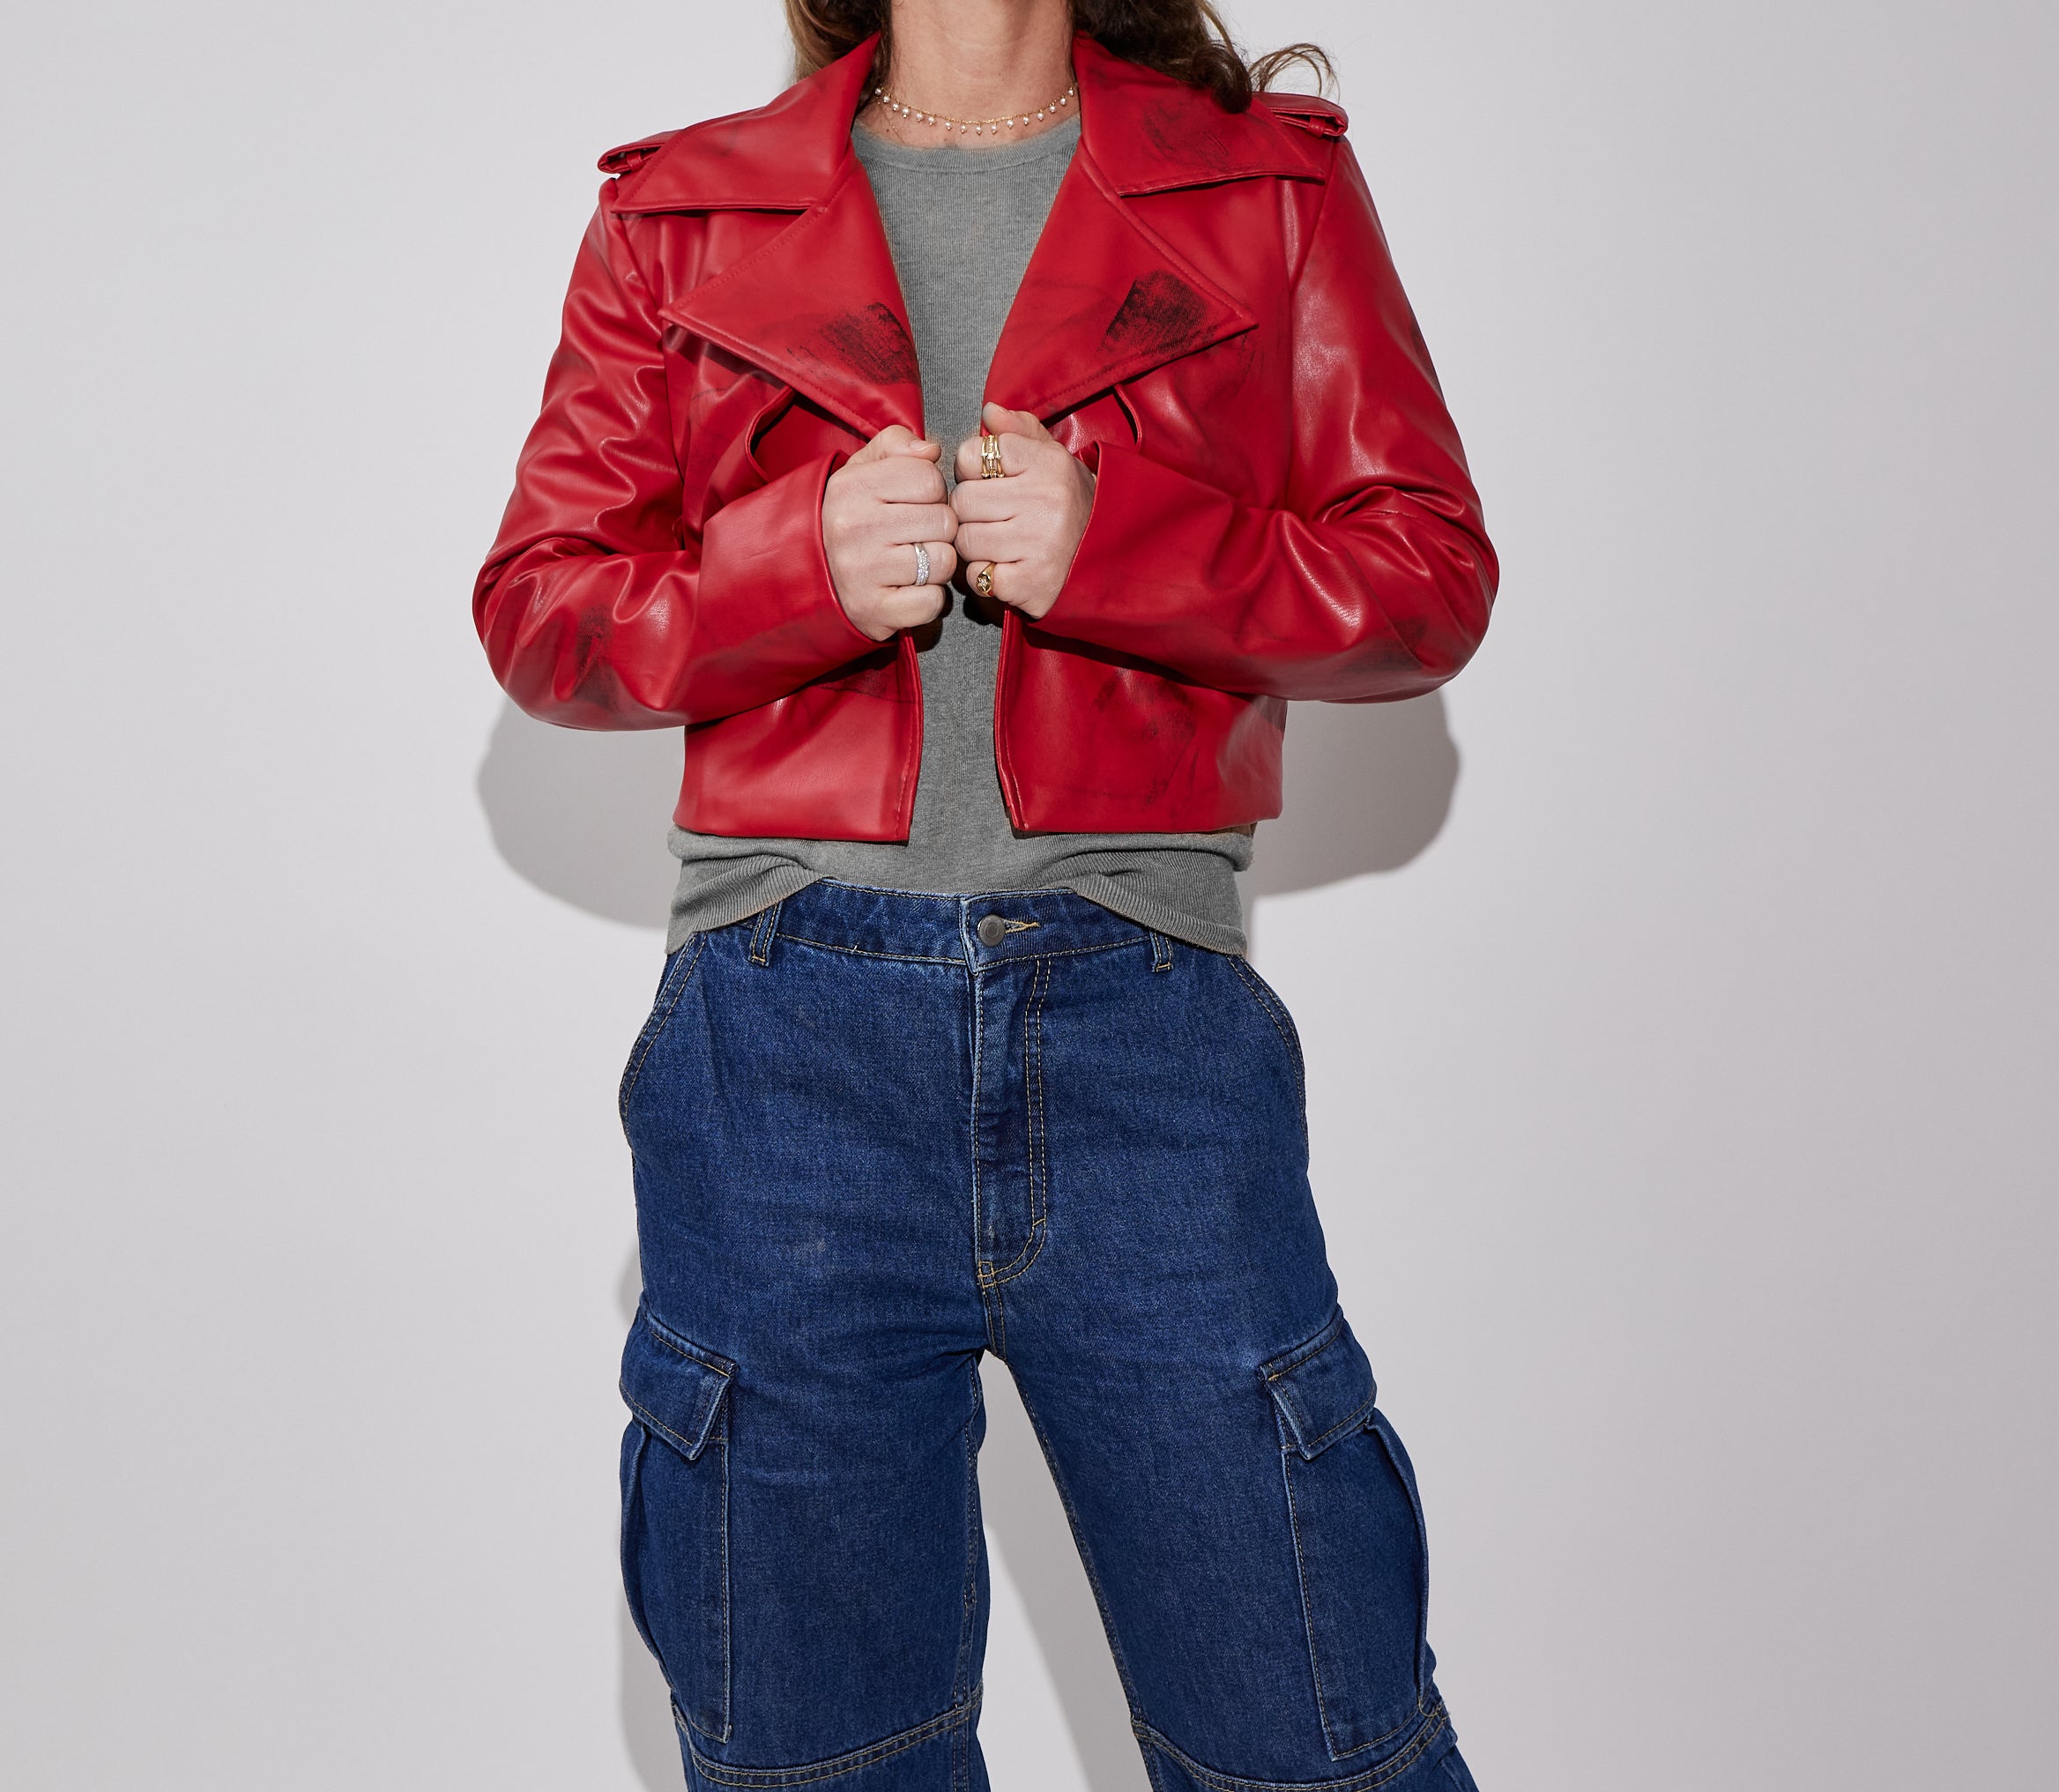 Short Red Leather Jacket